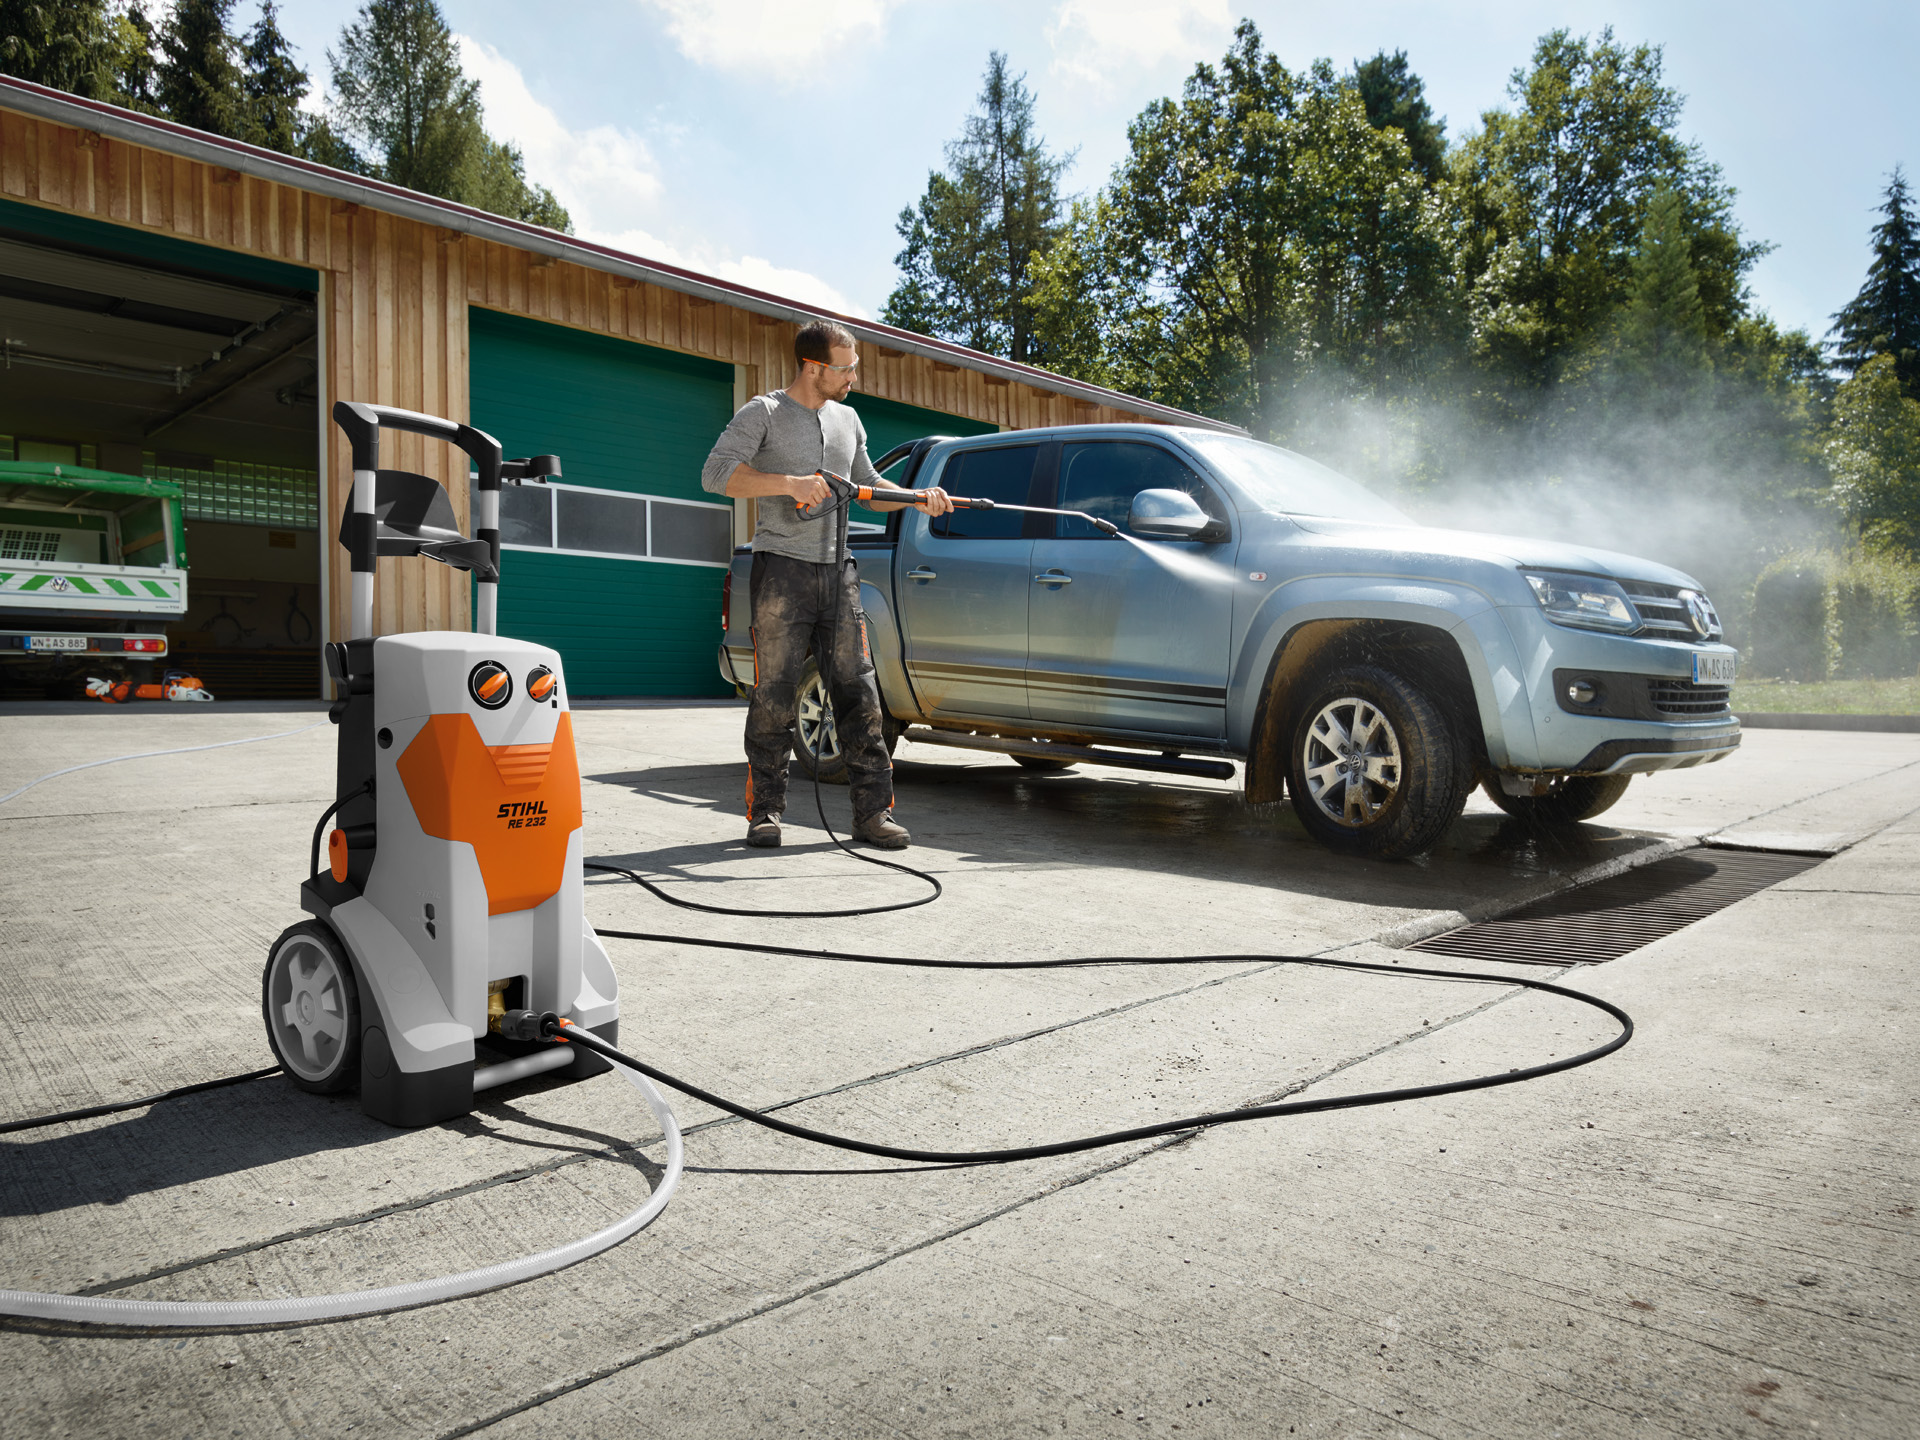 RE 232 Electric Pressure Washer